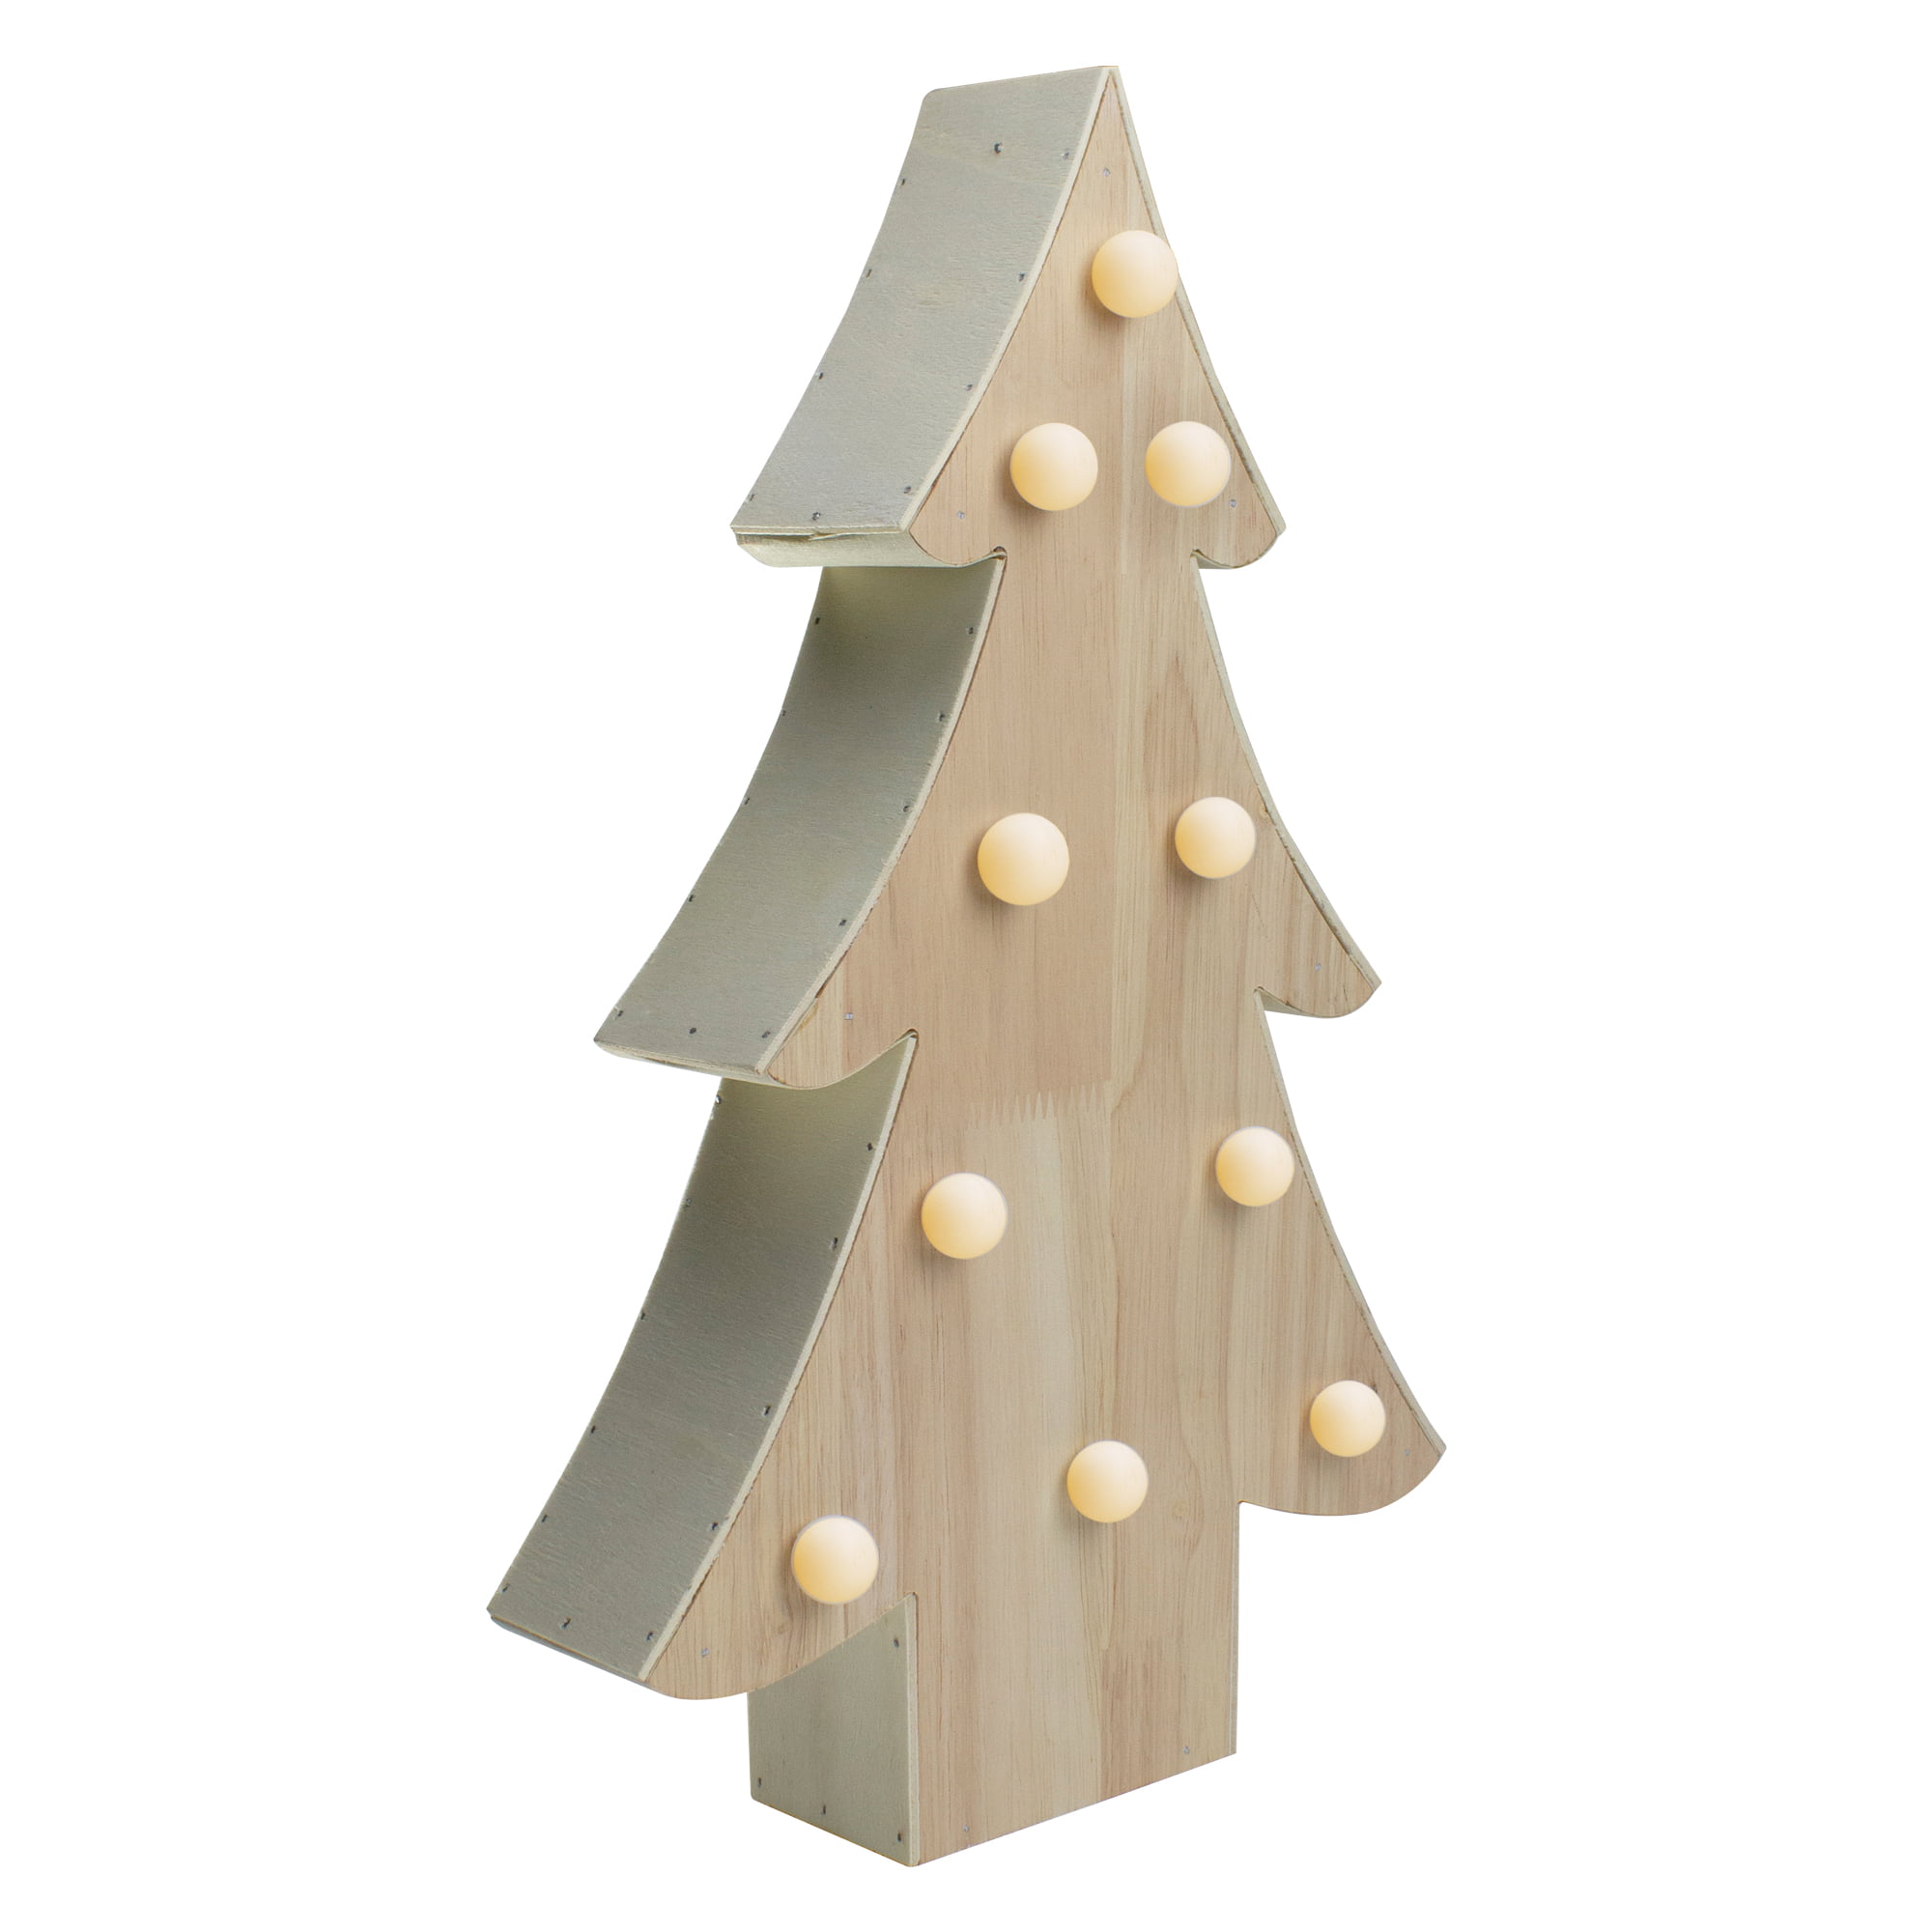 Wooden Christmas Tree Ornament Tabletop 3D Party Bedroom Decor Photo Prop 